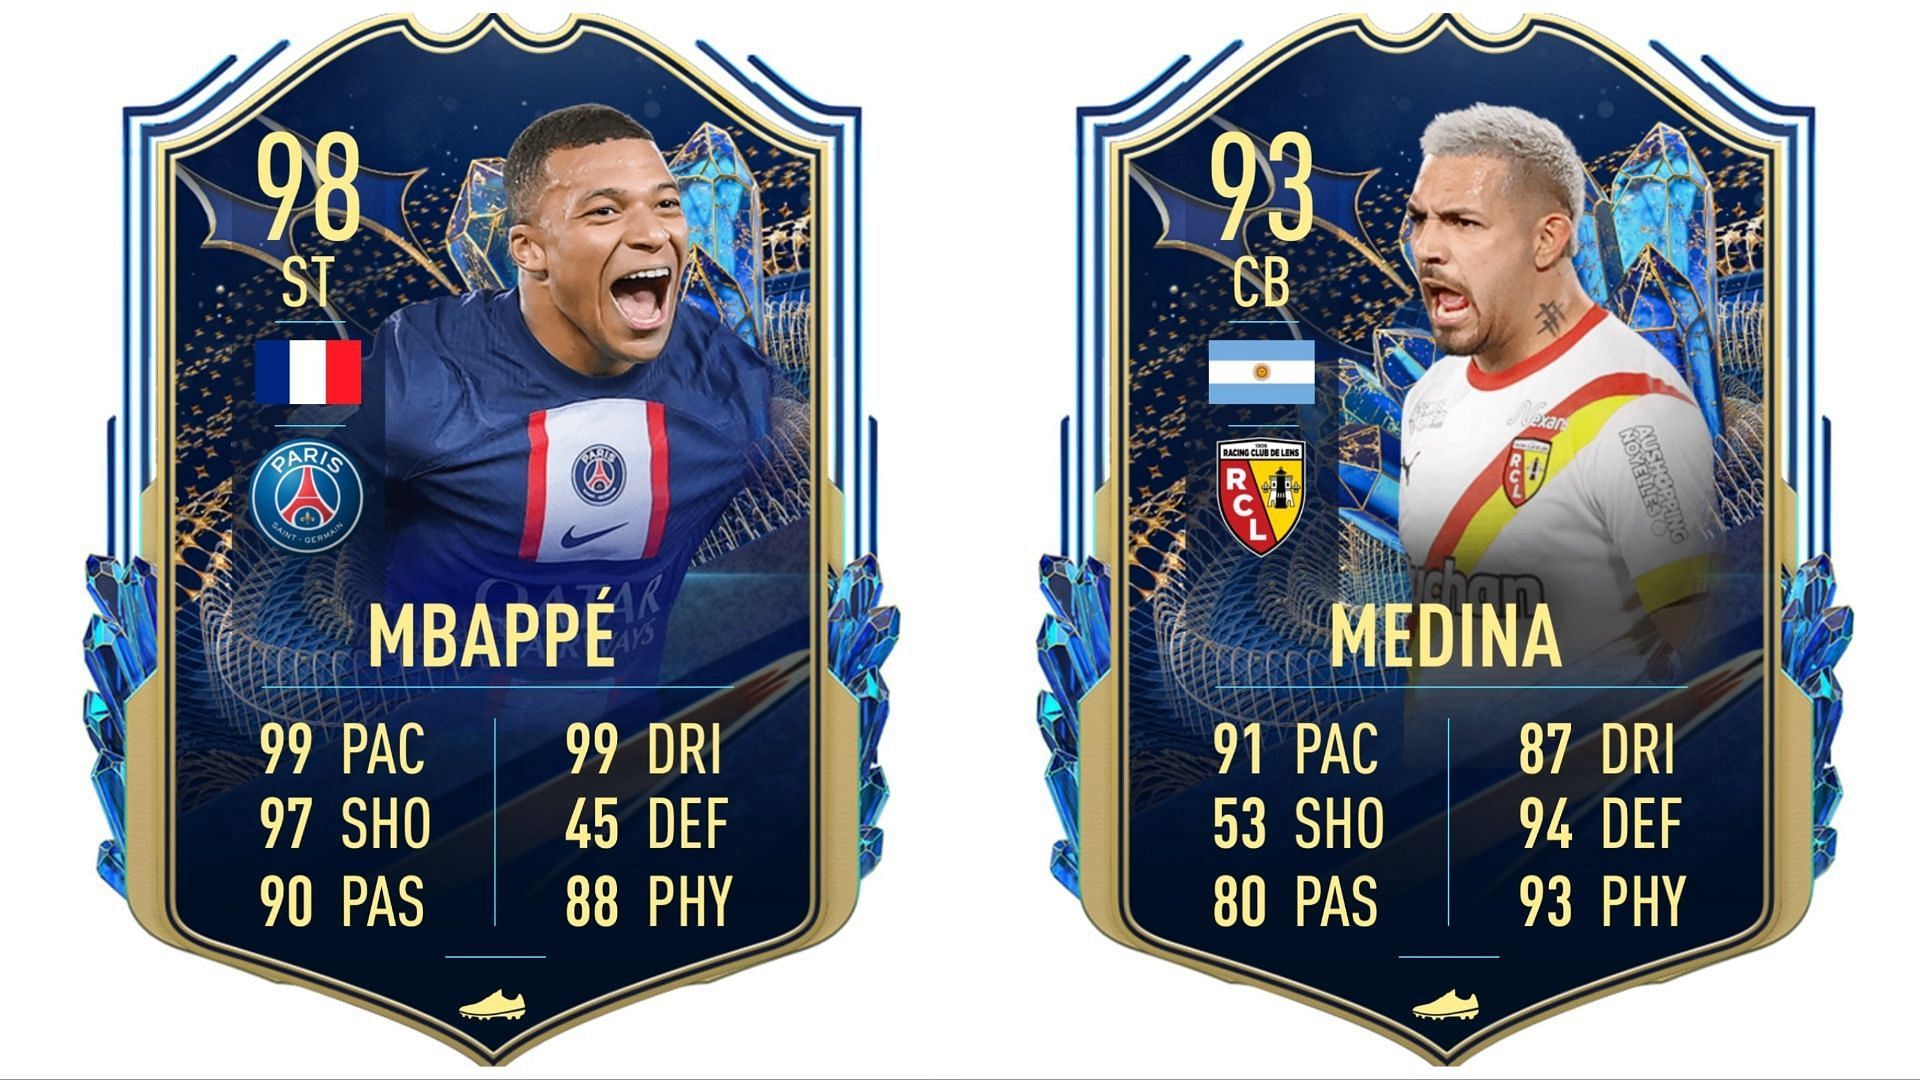 TOTS Mbappe and Medina have been leaked (Images via Twitter/FIFA23Leaked_ )